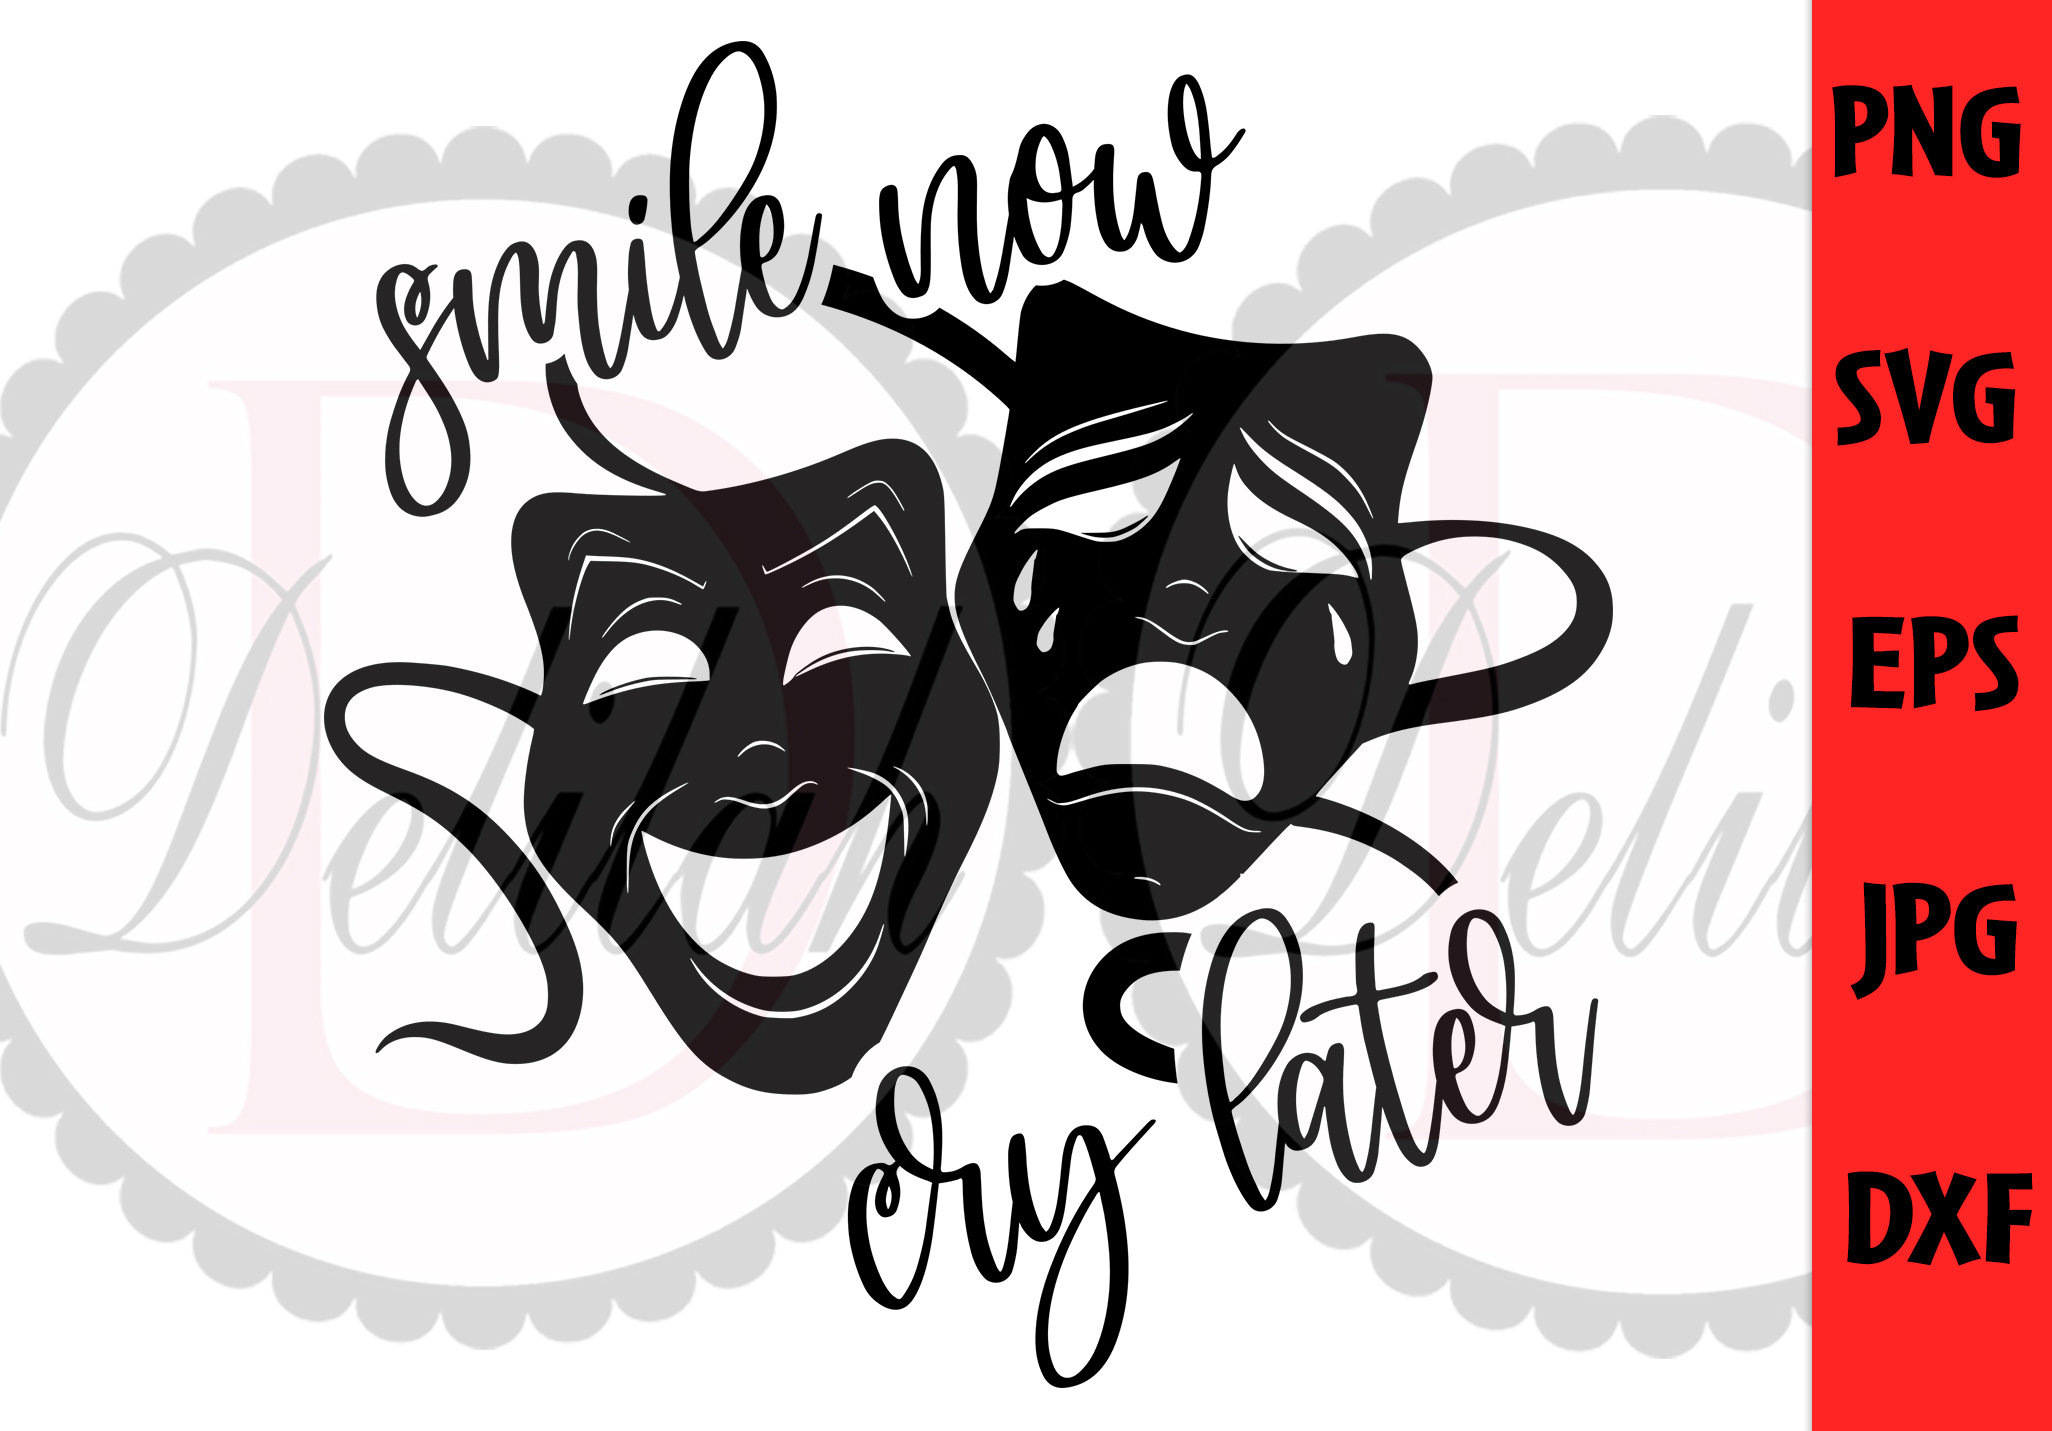 Smile Now Cry Later SVG • Lowrider Svg • Chicano art • Latina Svg • Drama  Mask Svg • Svg • Png • Jpg • Dxf • Instant Download